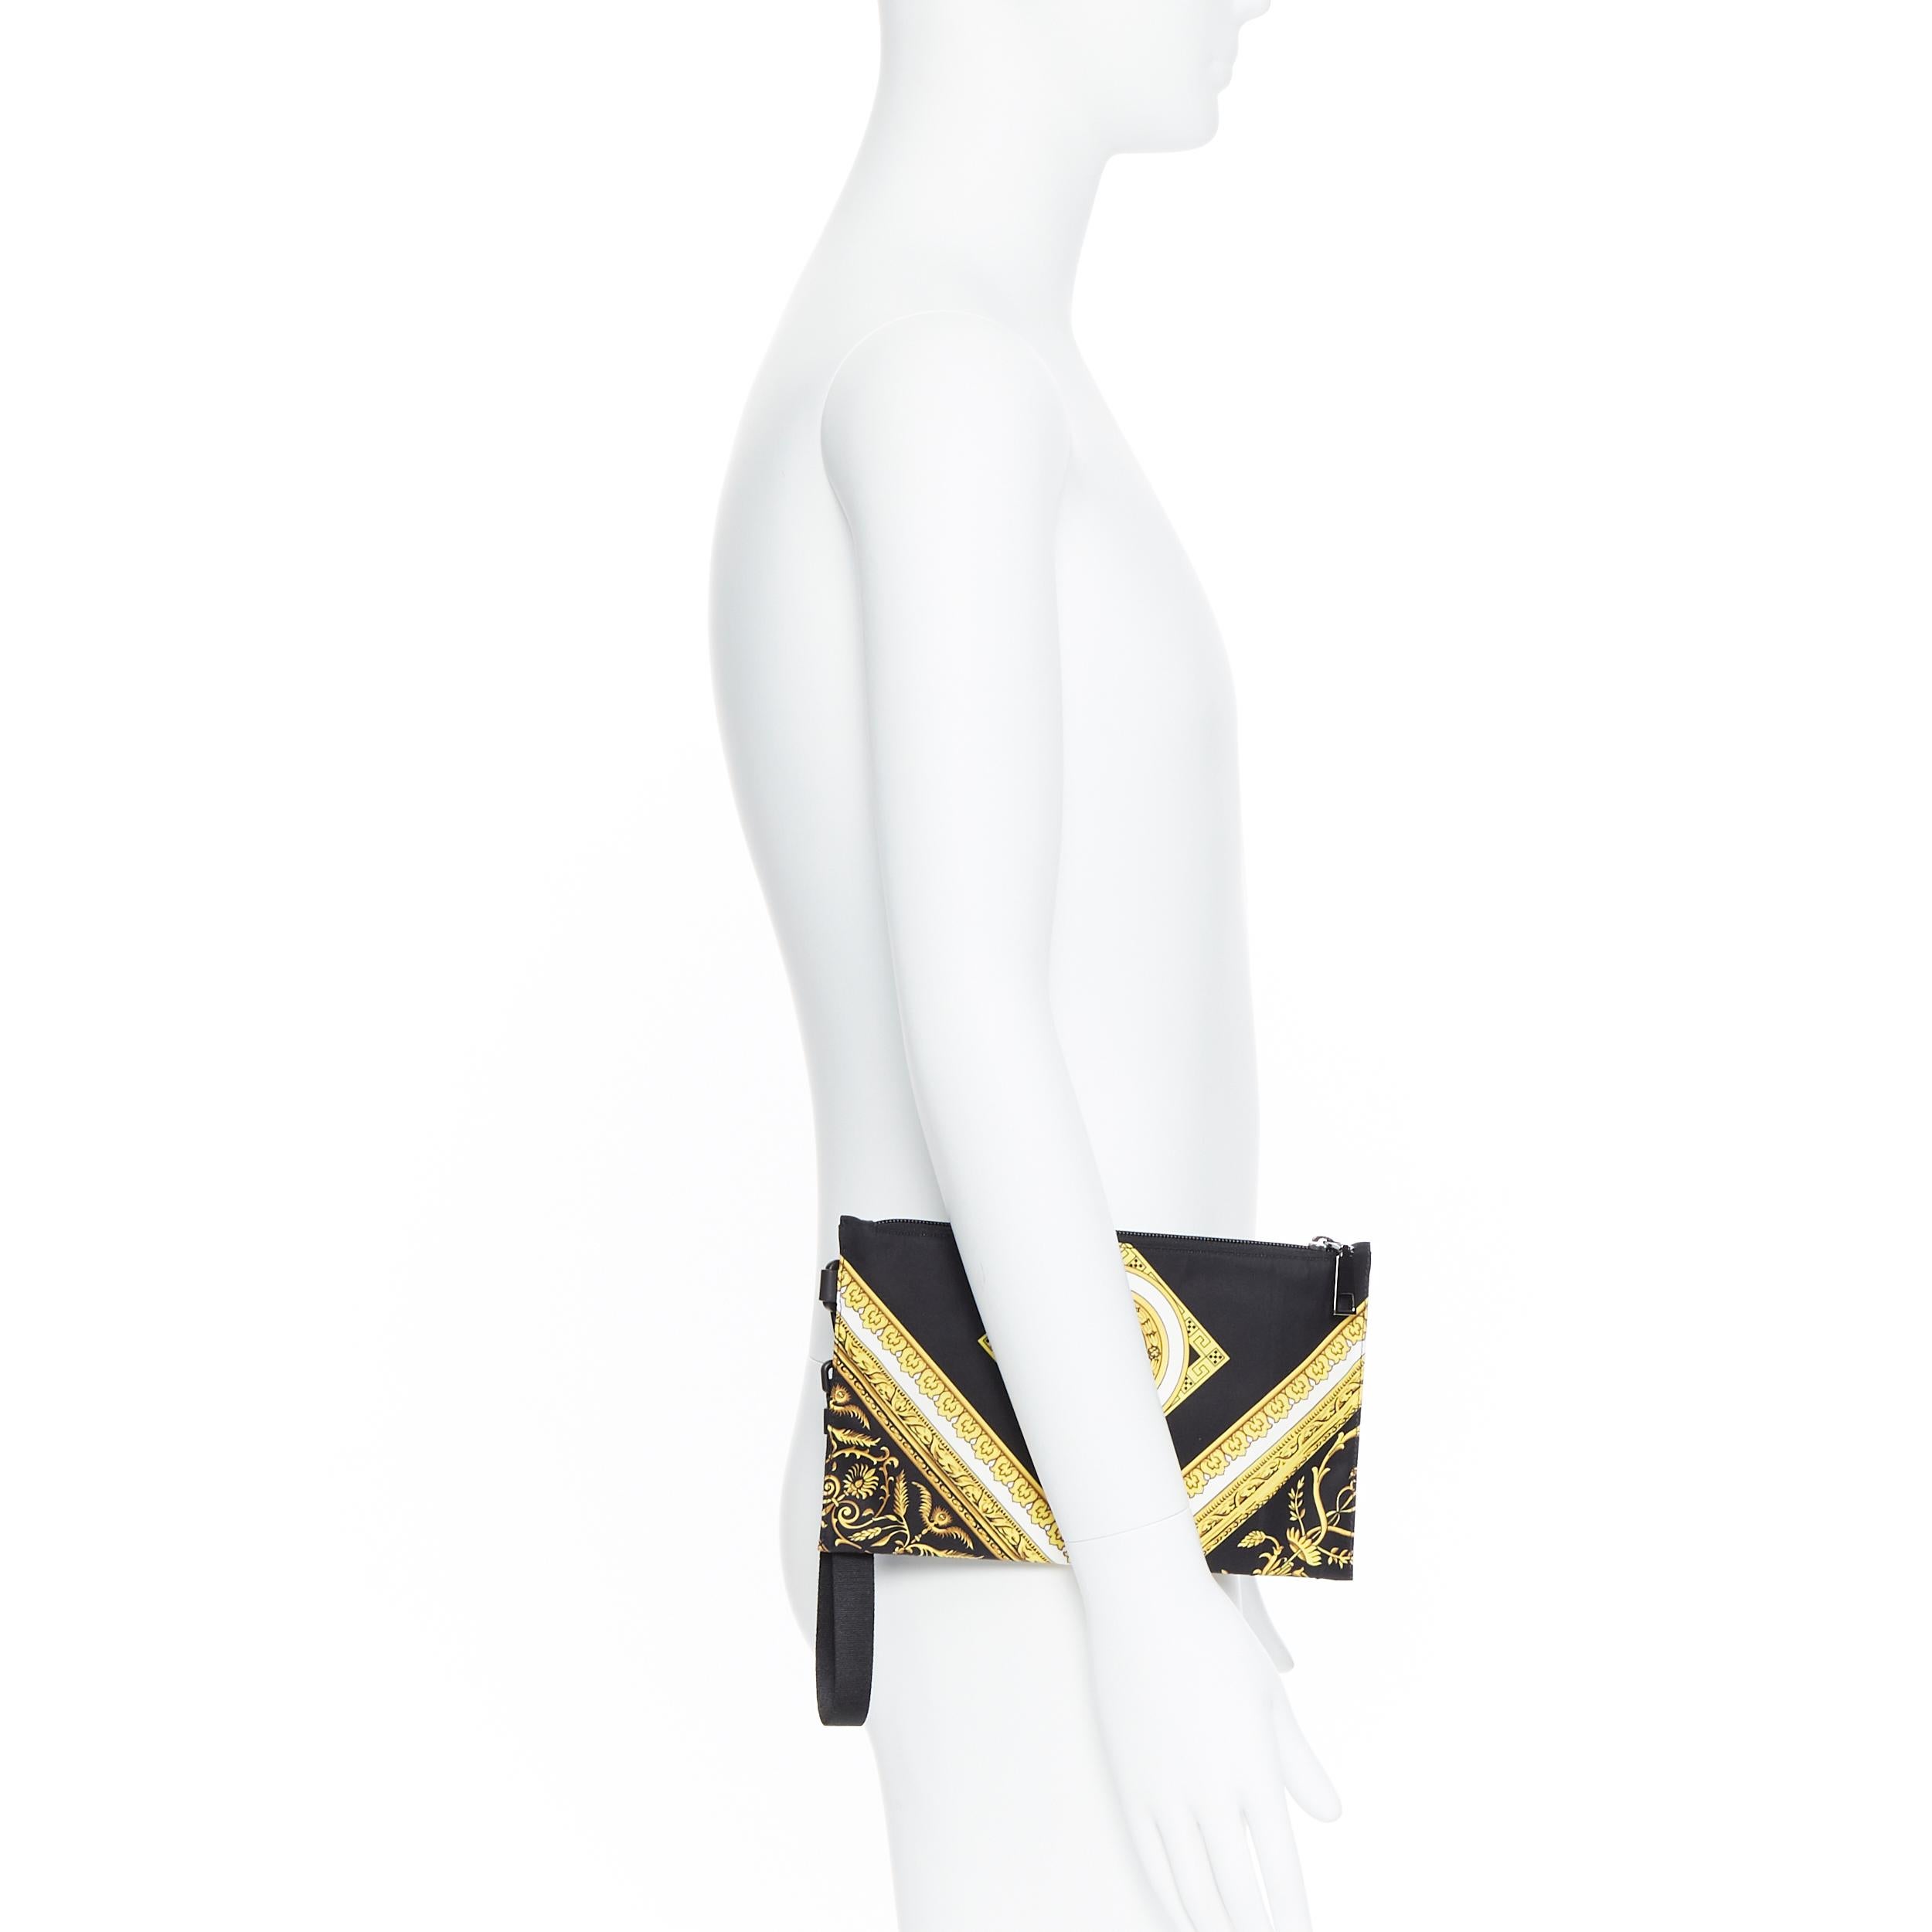 new VERSACE black gold baroque Medusa print cotton  top zip clutch pouch bag
Brand: Versace
Designer: Donatella Versace
Model Name / Style: Zip pouch
Material: Fabric
Color: Black and gold
Pattern: Floral; baroque
Closure: Zip
Extra Detail:
Made in: